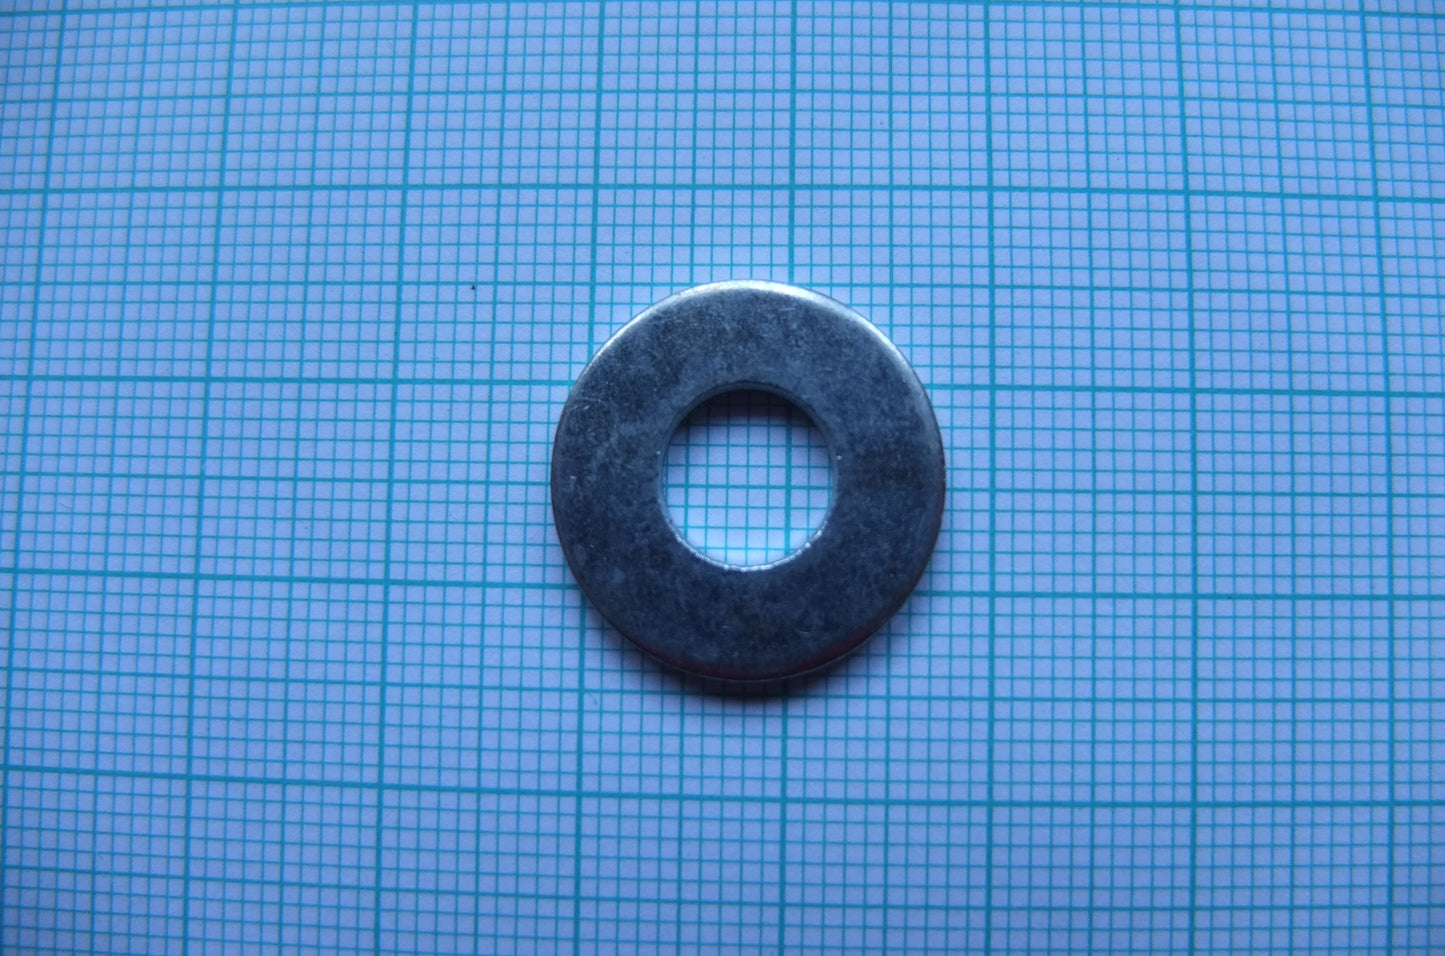 P9/035 Washer for domed screw